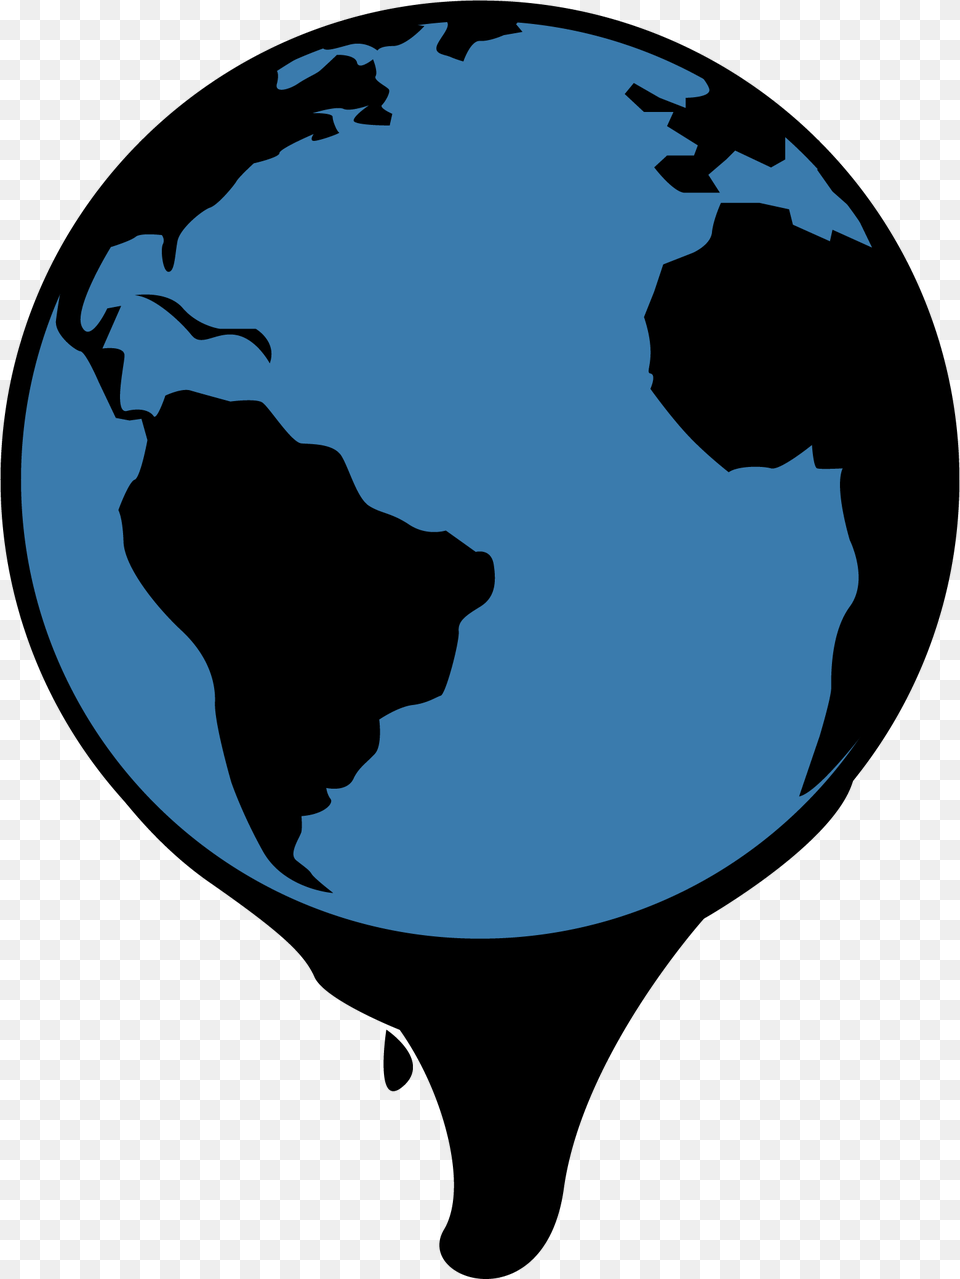 Adobe Photoshop Silhouette At Getdrawings Pizza Hut World Map, Astronomy, Globe, Outer Space, Planet Free Transparent Png